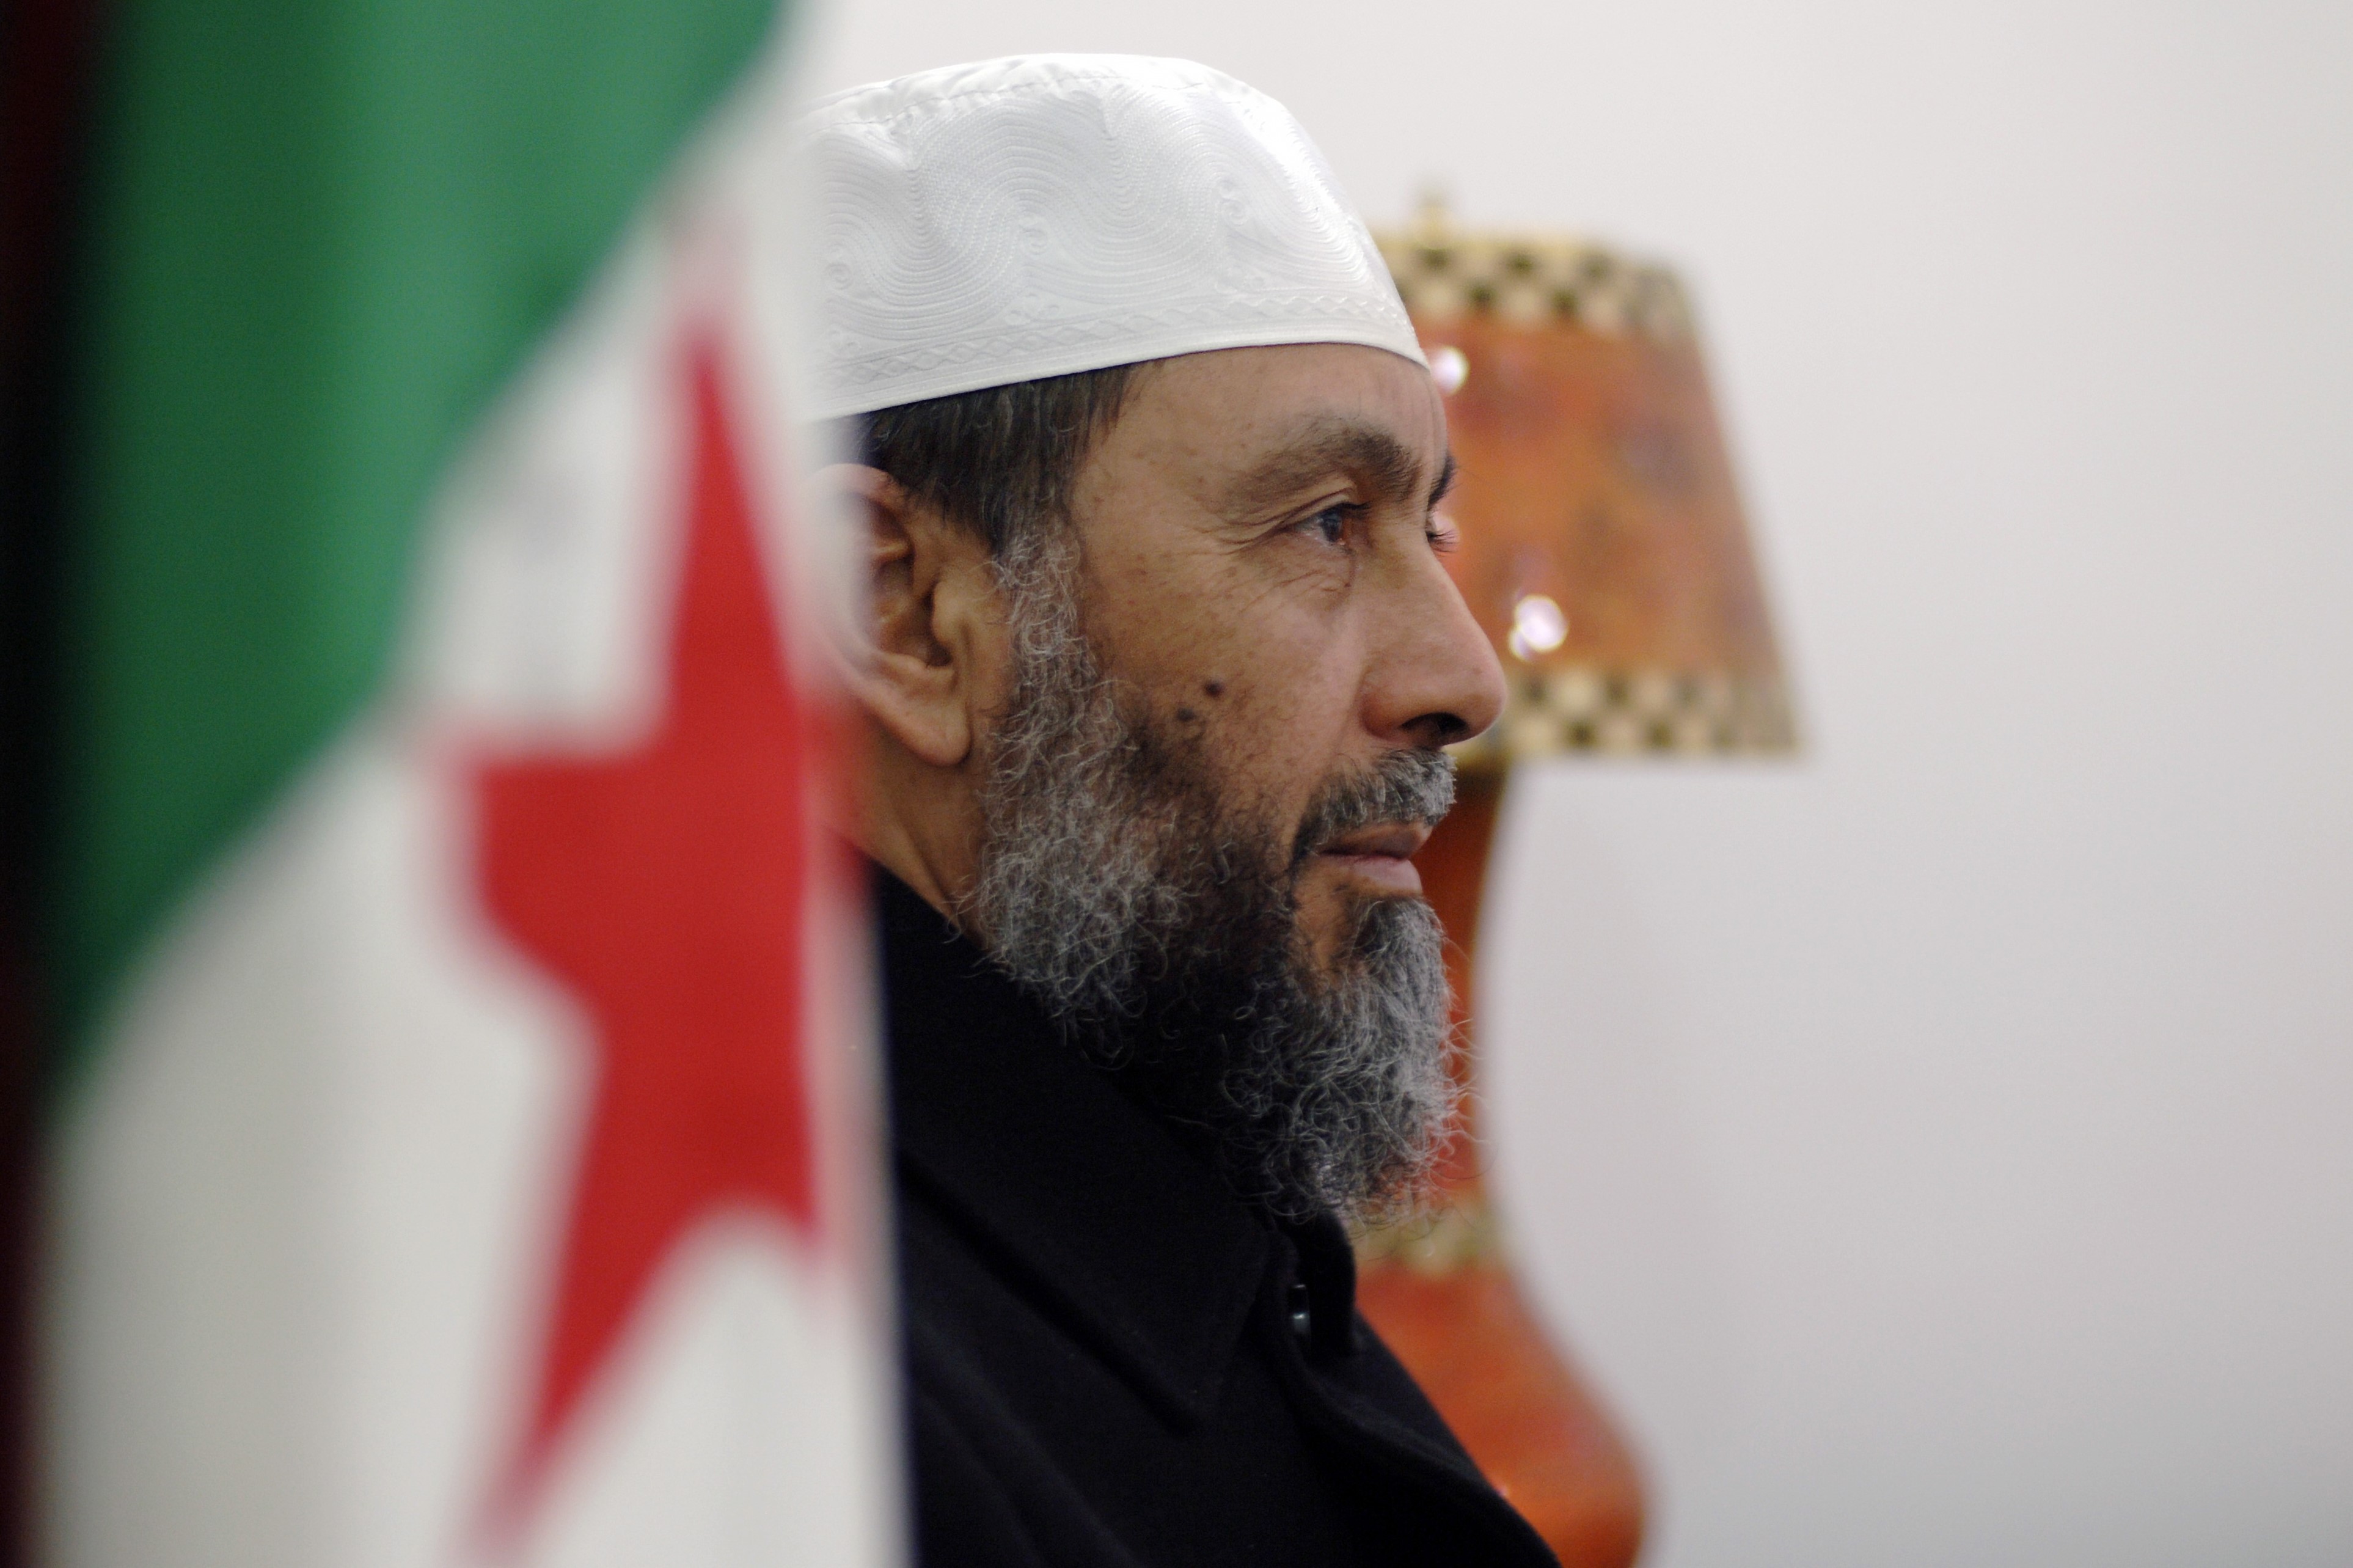 Abdellah Djaballah, the head of Algeria's Islamist Front for Justice and Development (FJD), poses at the party's headquarters in the capital Algiers on 15 January 2017 (AFP)